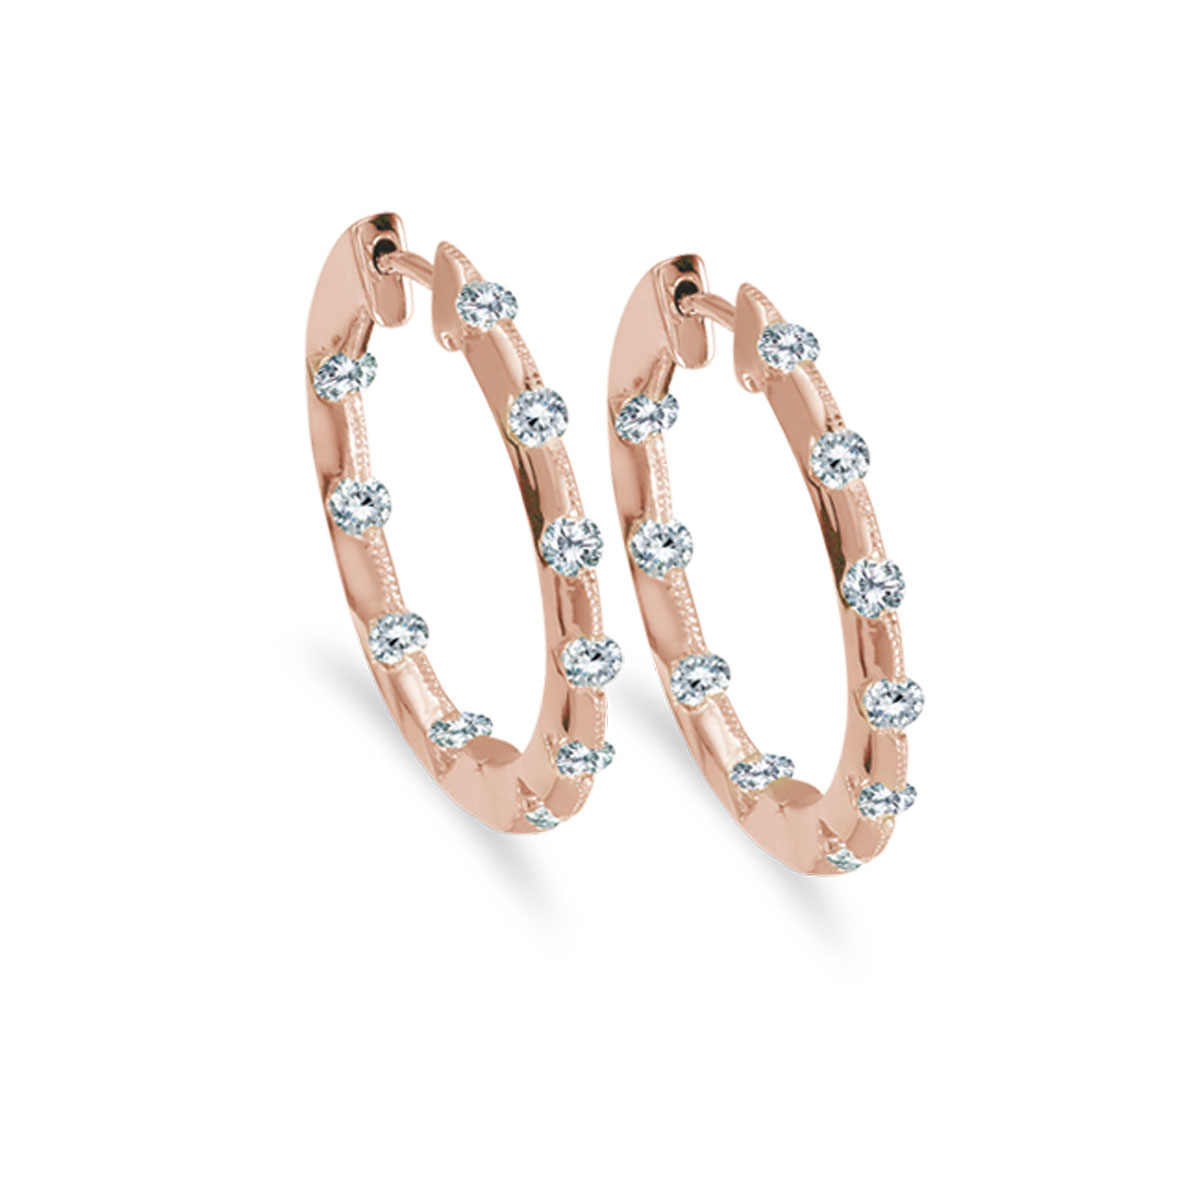 JCX2387: 19 mm diamond inside/outside hoop earrings in beautiful 14k rose gold. The perfect look for day or night. .50 carat genuine diamonds.